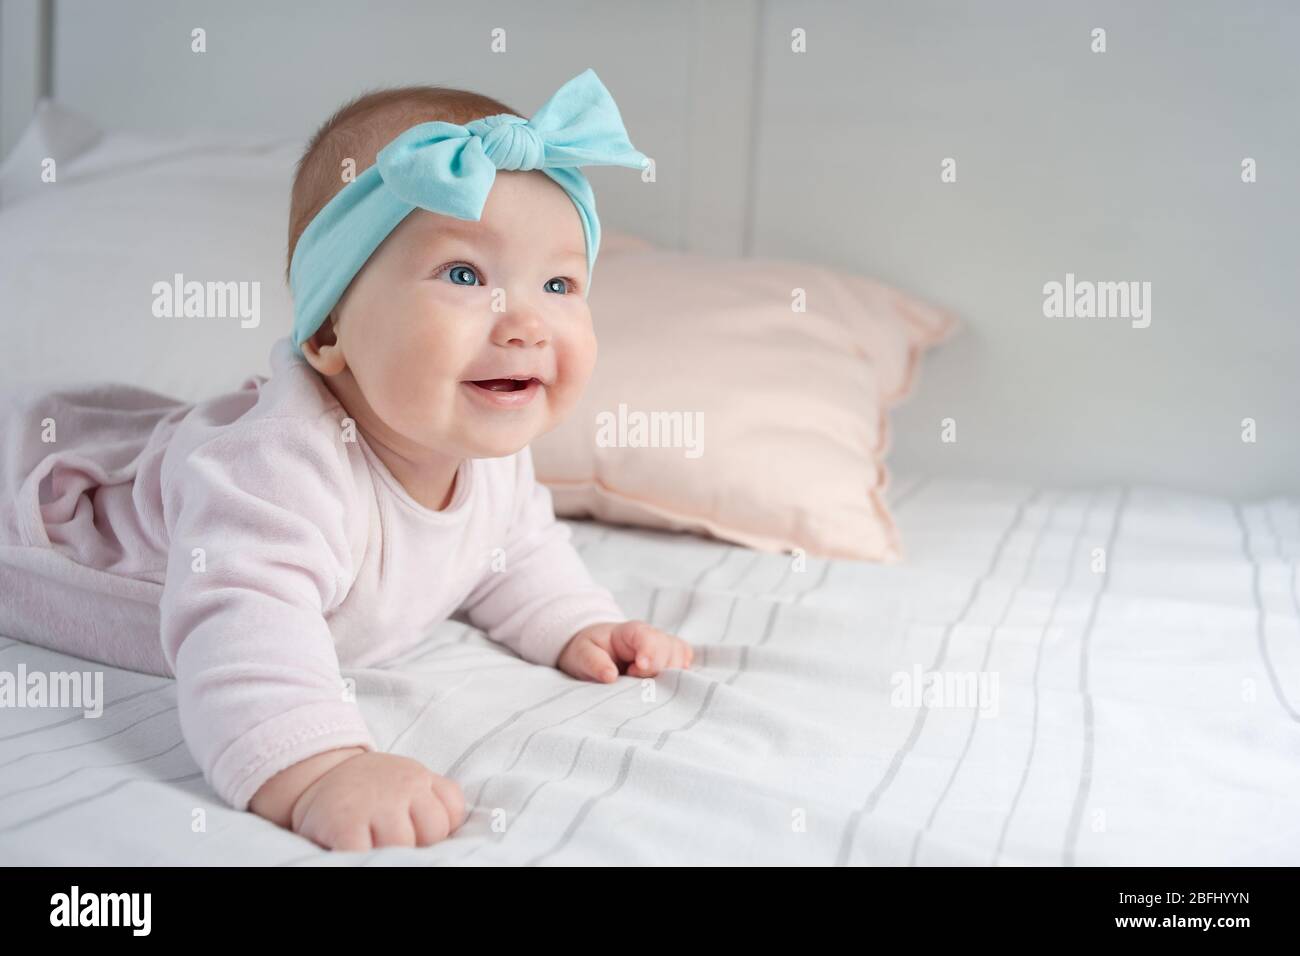 Newborn baby lies on its stomach and smiles. A child with blue eyes and a blue headband. Cute baby wearing lying on belly in nursery room. Beautiful s Stock Photo